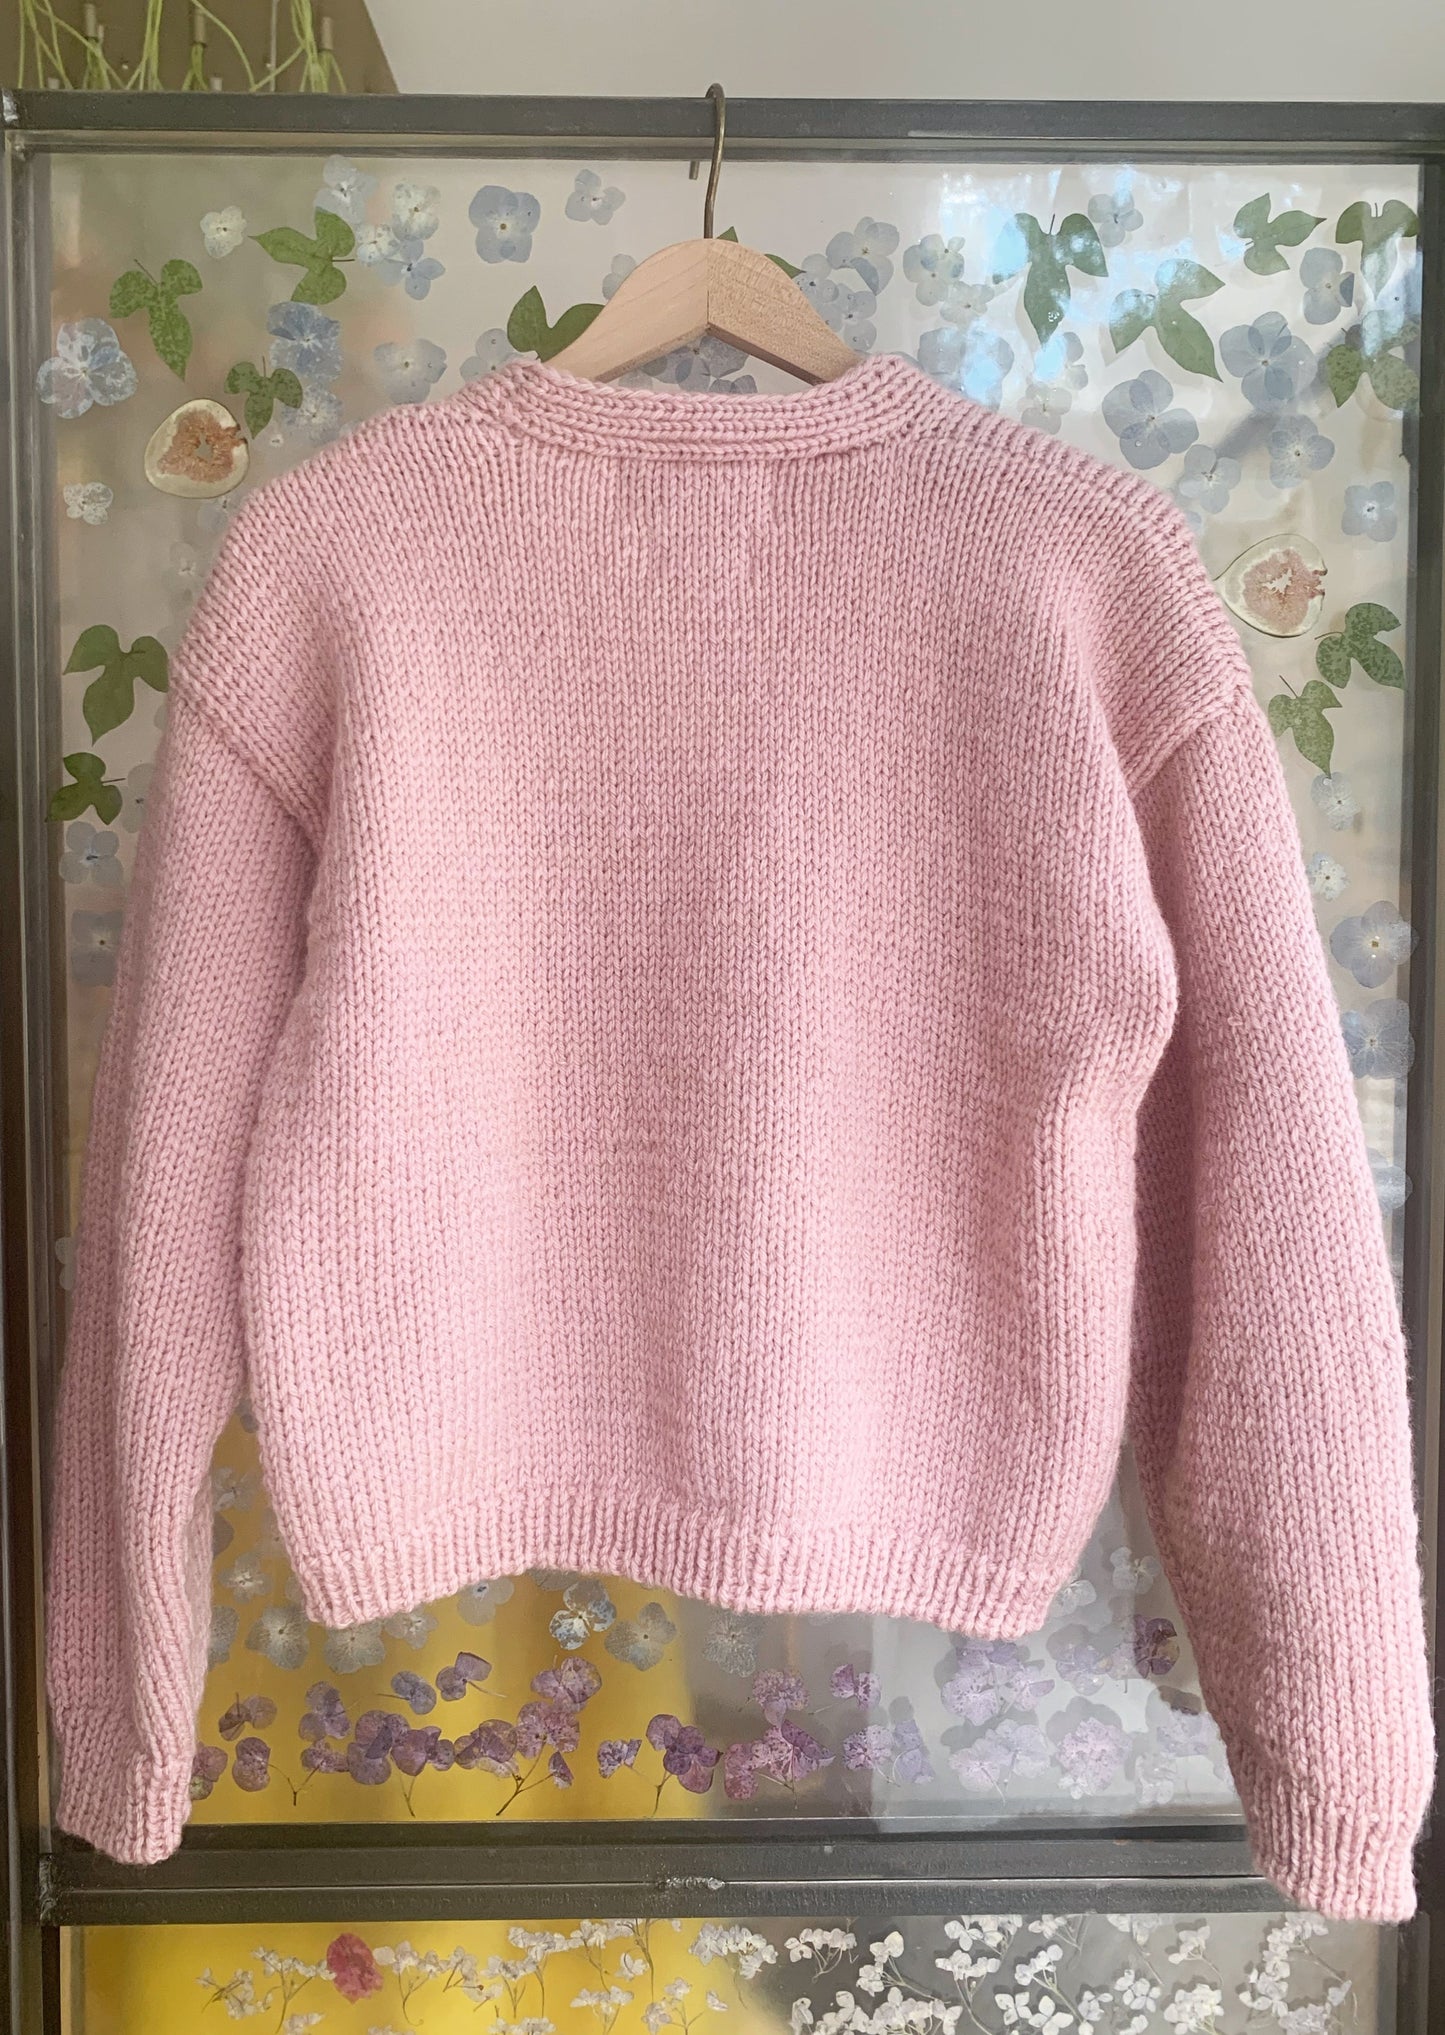 An exciting collaboration between designers Olivia Cheng and Lirika Matoshi, meet your new favorite pink cardigans outfitted with real preserved strawberry buttons. Slightly oversized fit. Deeply cozy and lovable.